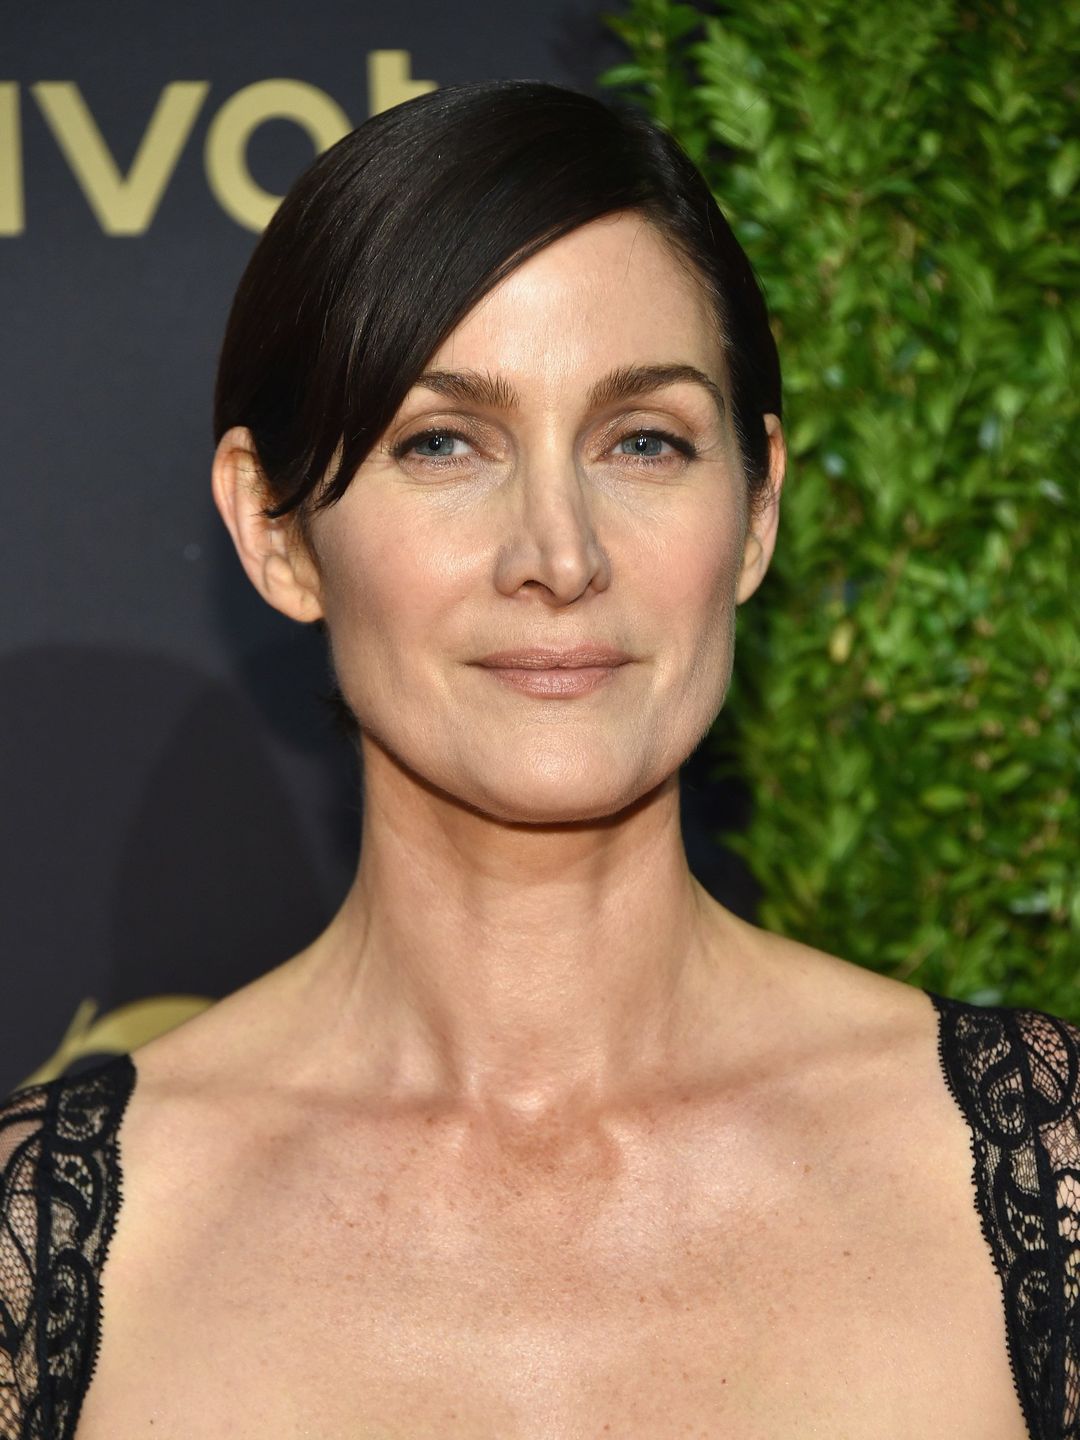 Carrie-Anne Moss how old is she